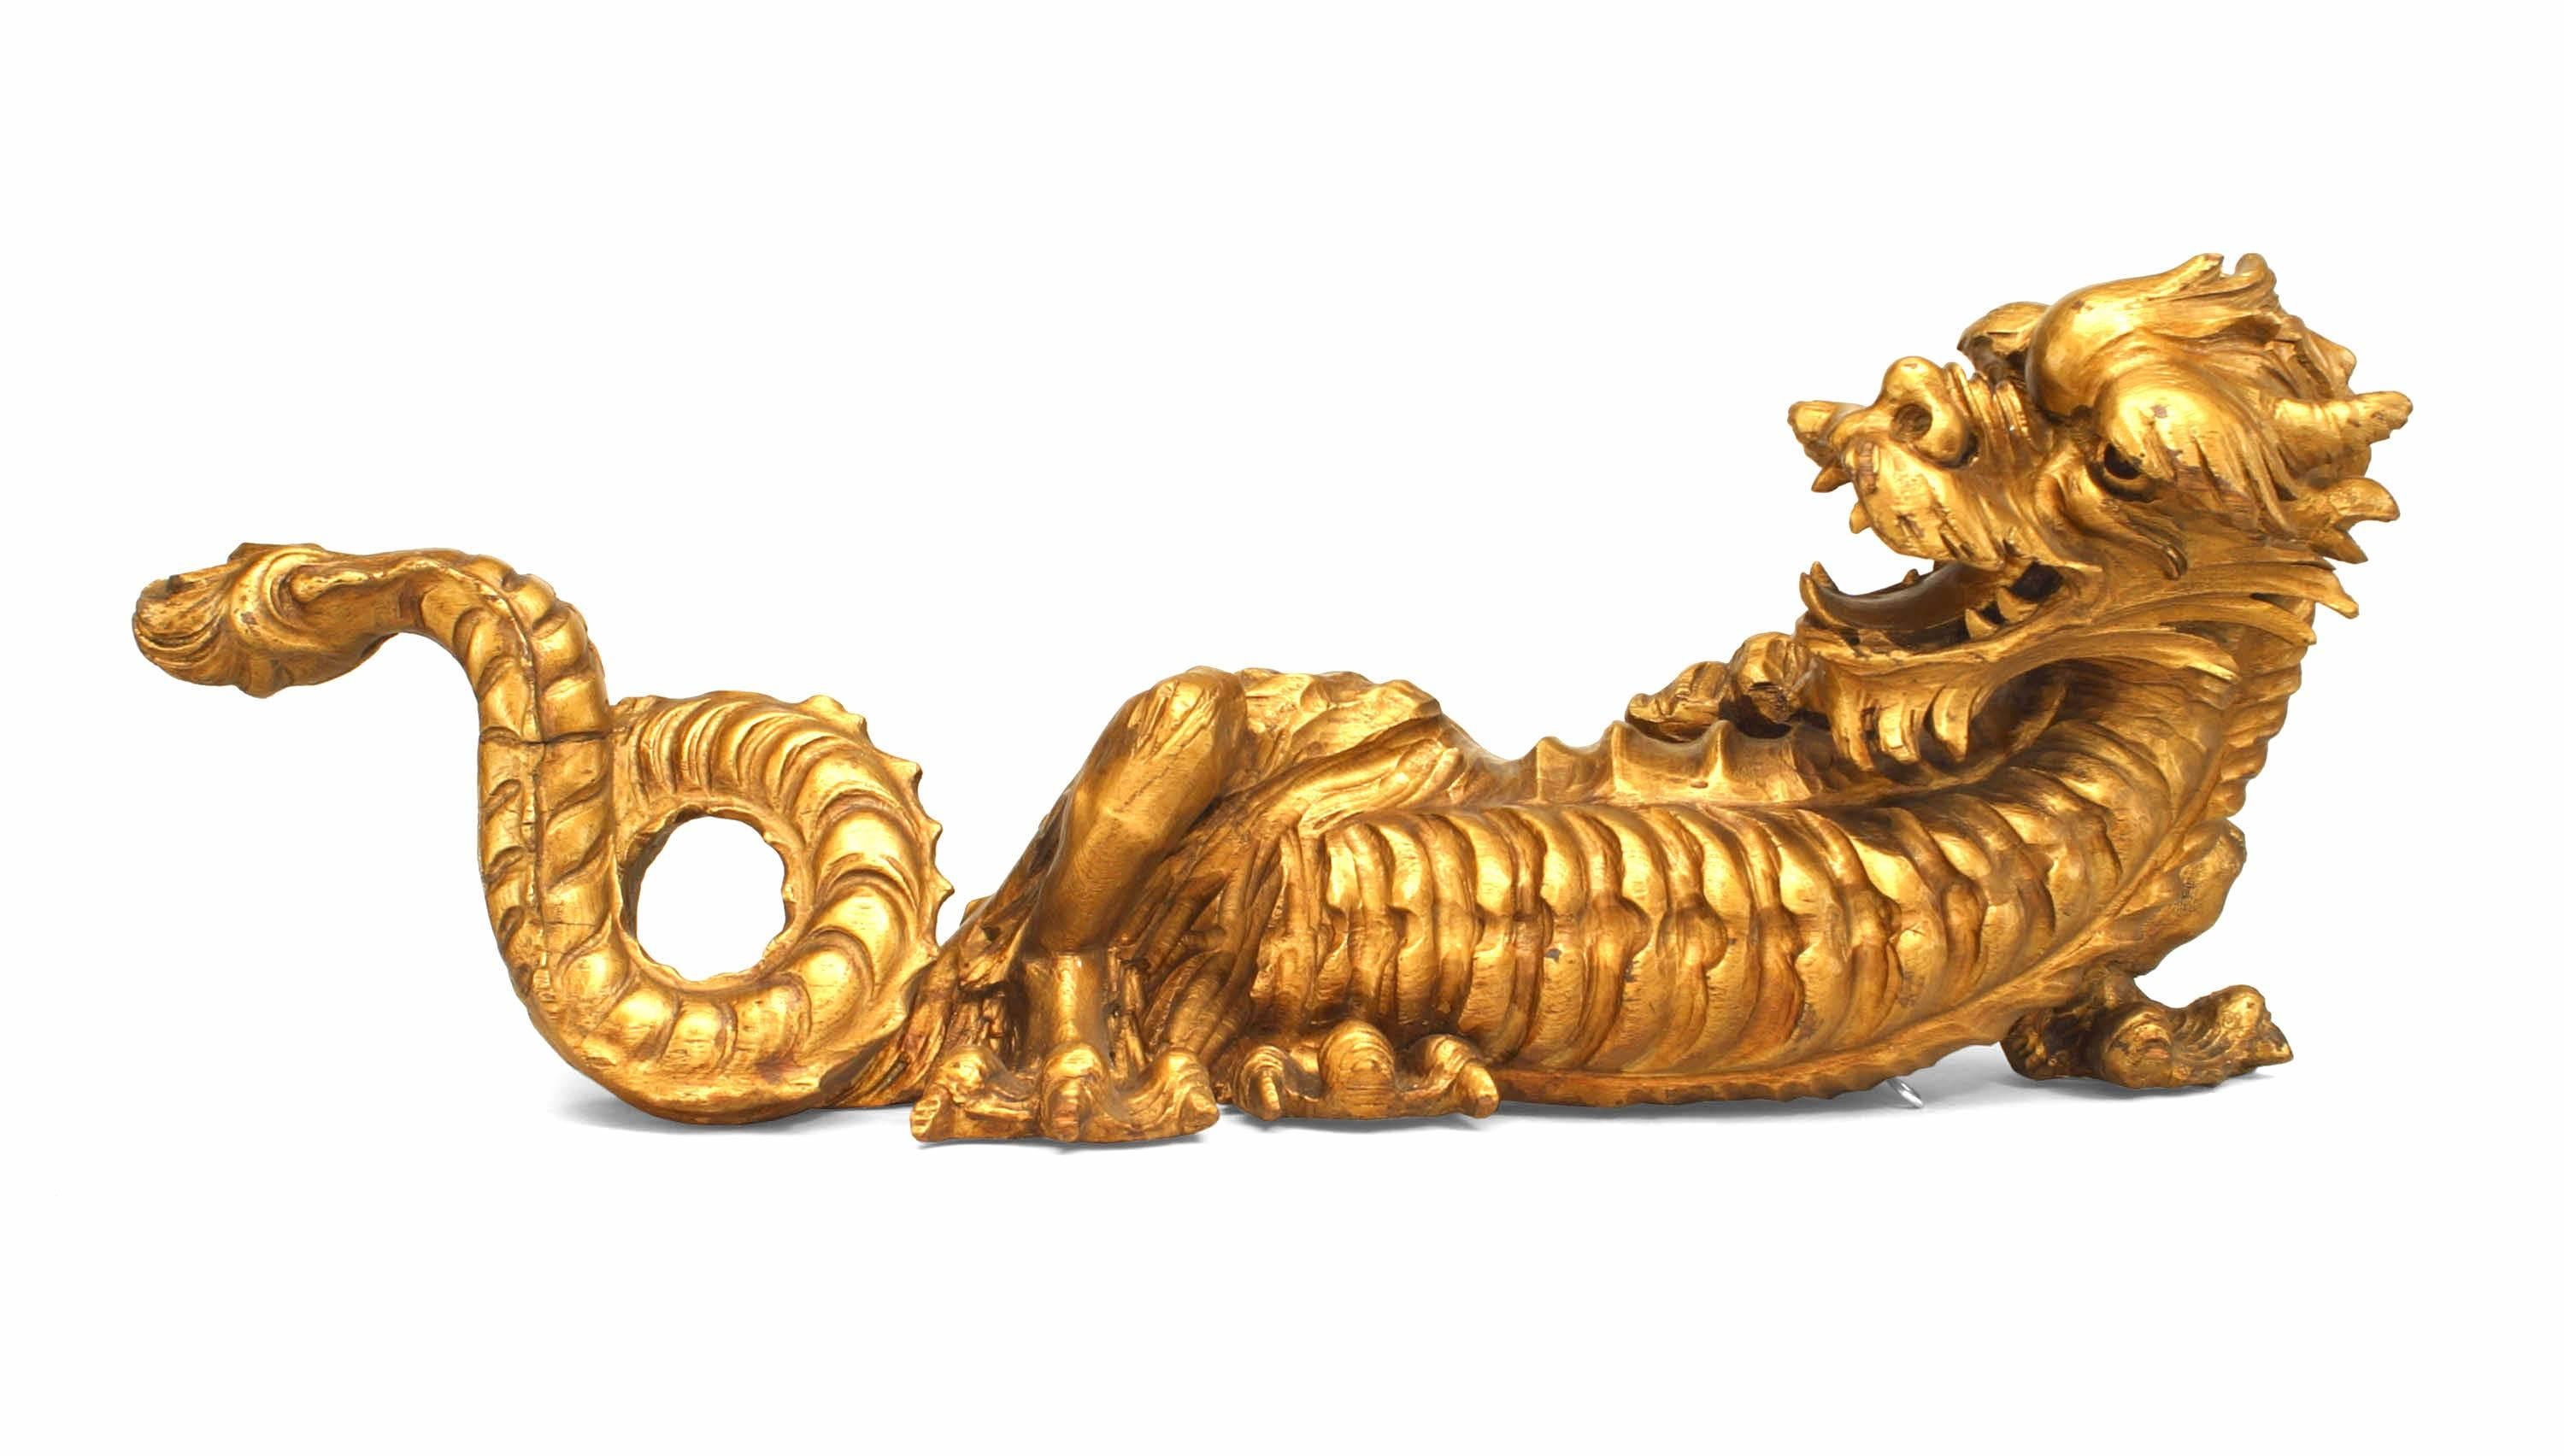 Hand-Carved Pair of Italian Carved Gold Painted Dragons